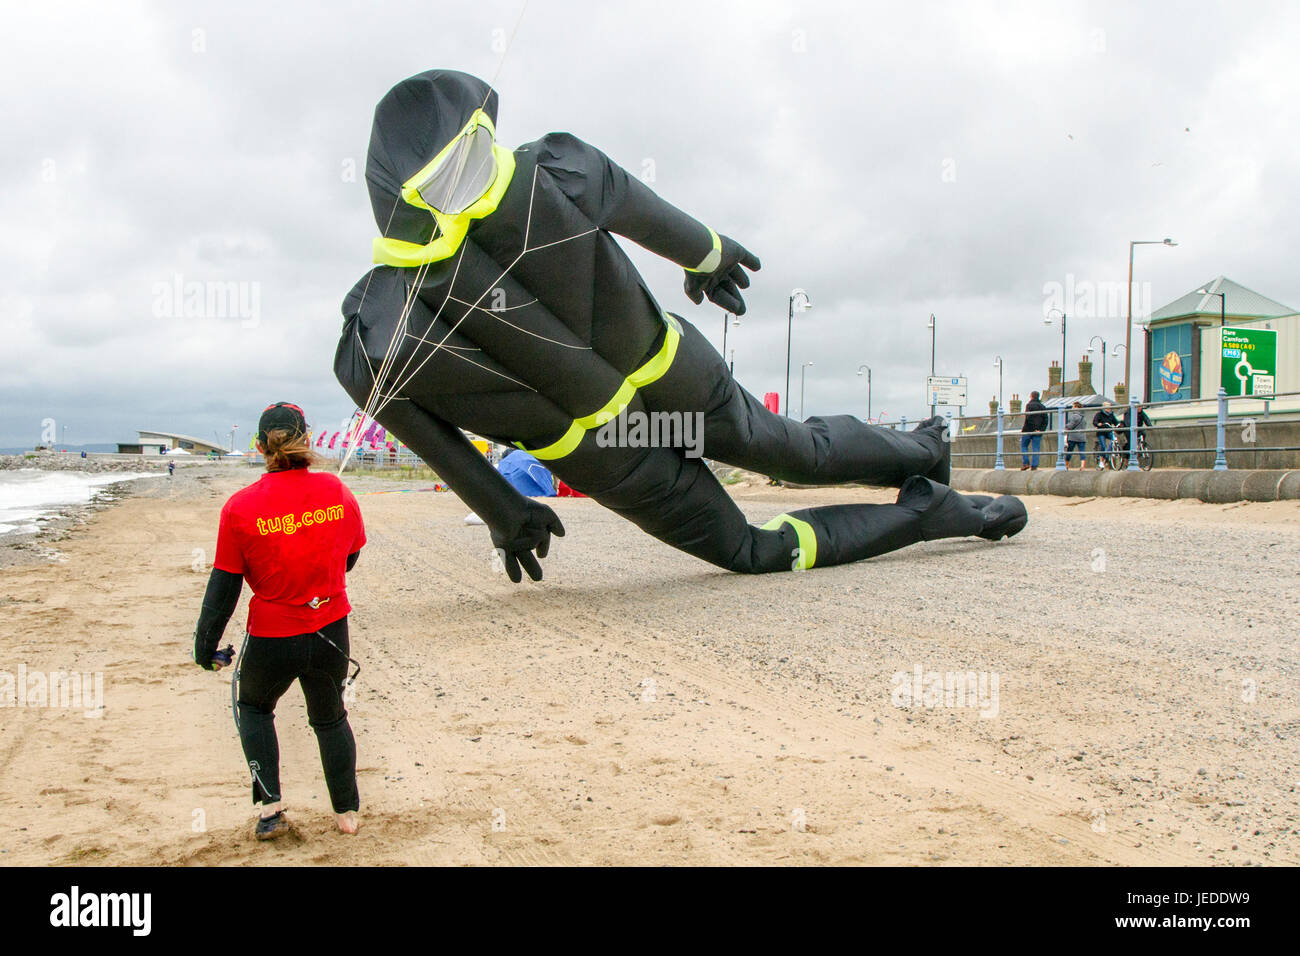 Morecambe, Lancashire, UK. 24th June, 2015. UK Weather. Strong winds on the coast as Kite Flyers struggle to launch and retrieve their kites.The Midland Hotel Catch The Wind Kite Festival is an annual event on Morecambe seafront, when for the whole day the skies are full of the most spectacular shapes, colours and creations. Credit:MediaWorldImages/AlamyLiveNews Stock Photo